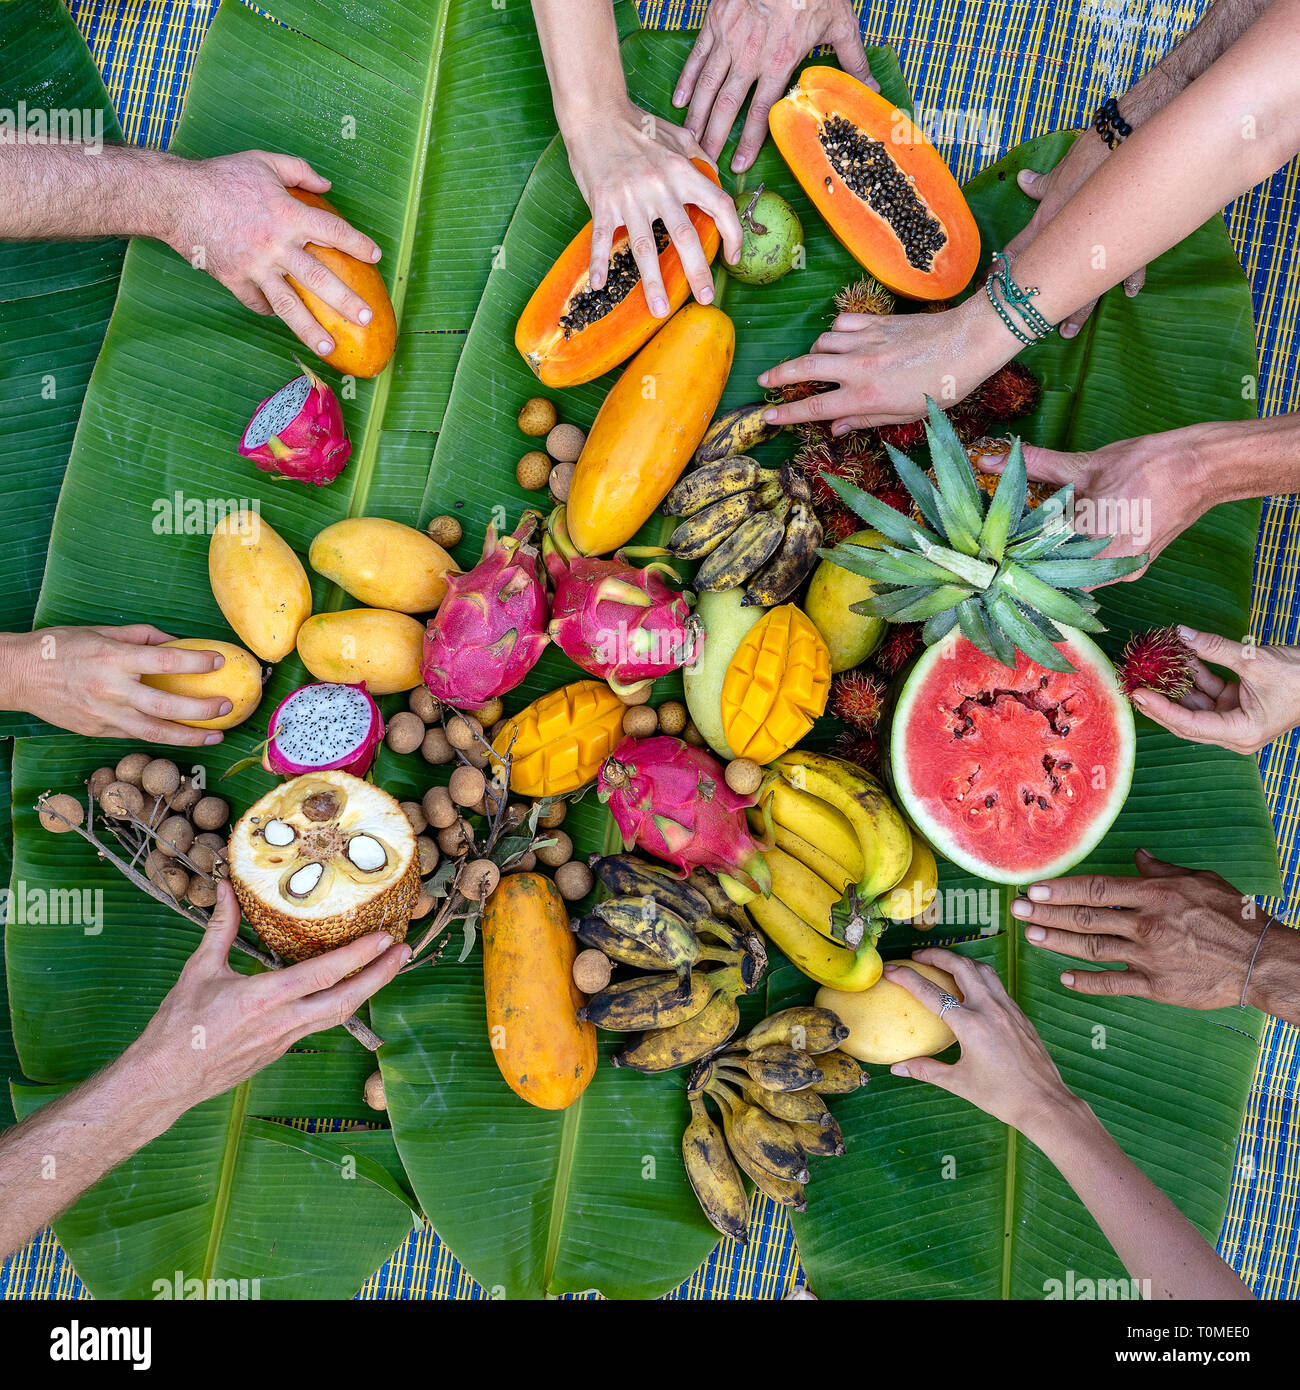 Tropical fruits on green banana leaves and people hands. Group of happy friends having nice food, enjoying the party and communication. Mango, papaya, Stock Photo